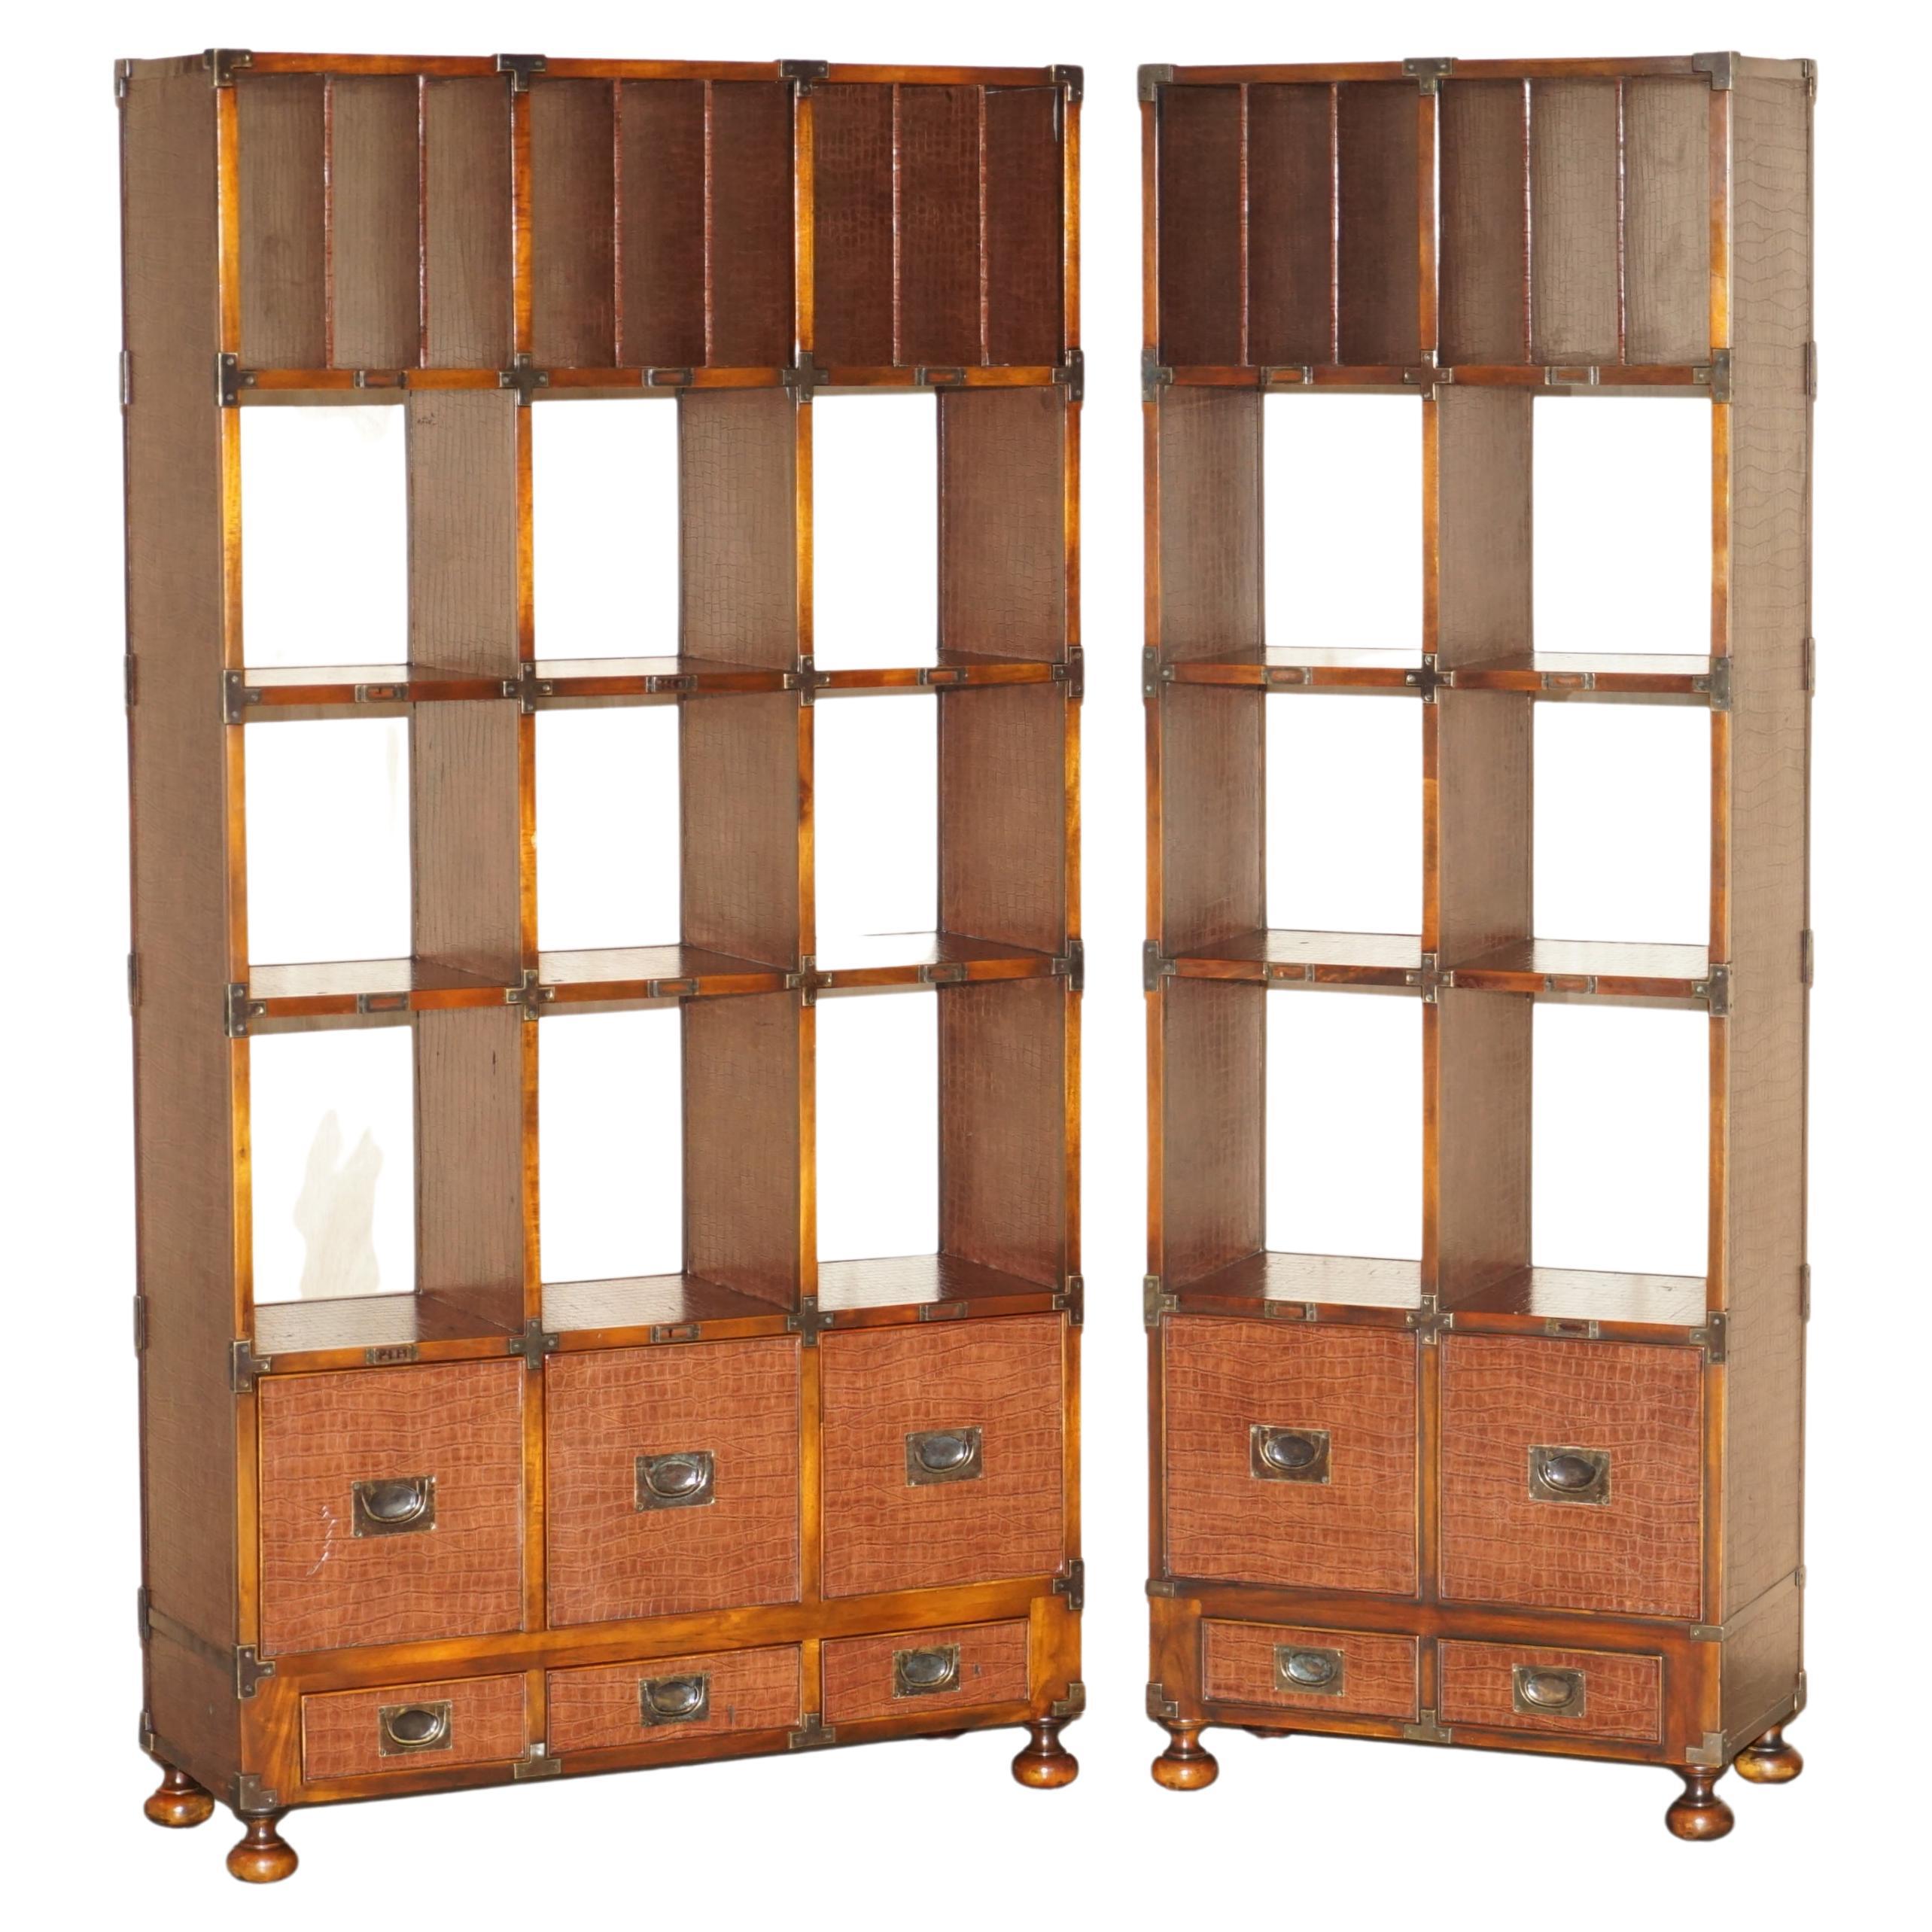 PAIR OF CROCODILE LEATHER Offene LiBRARY-BOOKCASES MIT DRAWERS & RECORD SLOTS